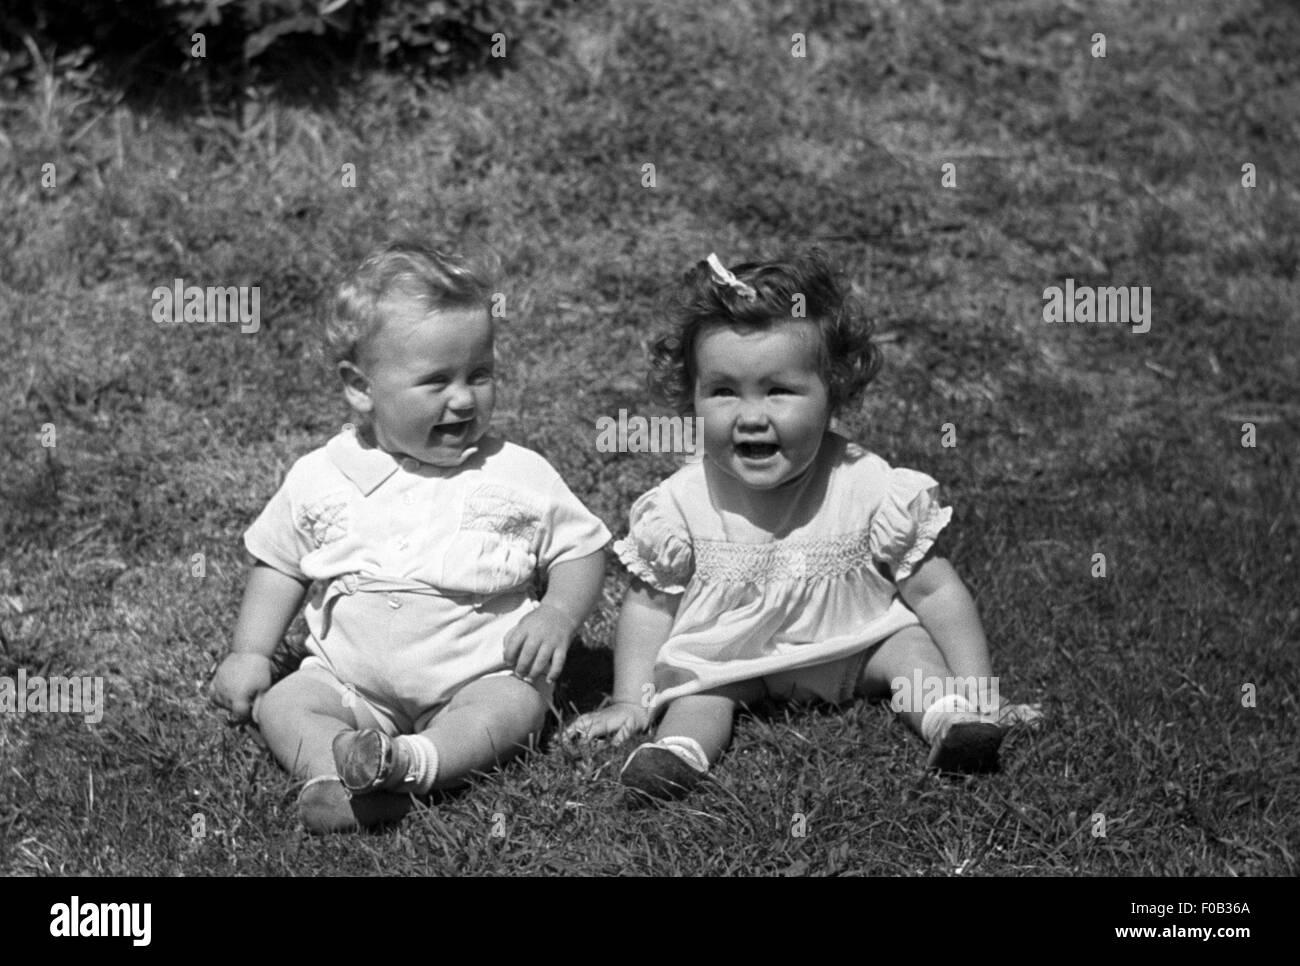 Two little children one boy and one girl smiling and  laughing Stock Photo